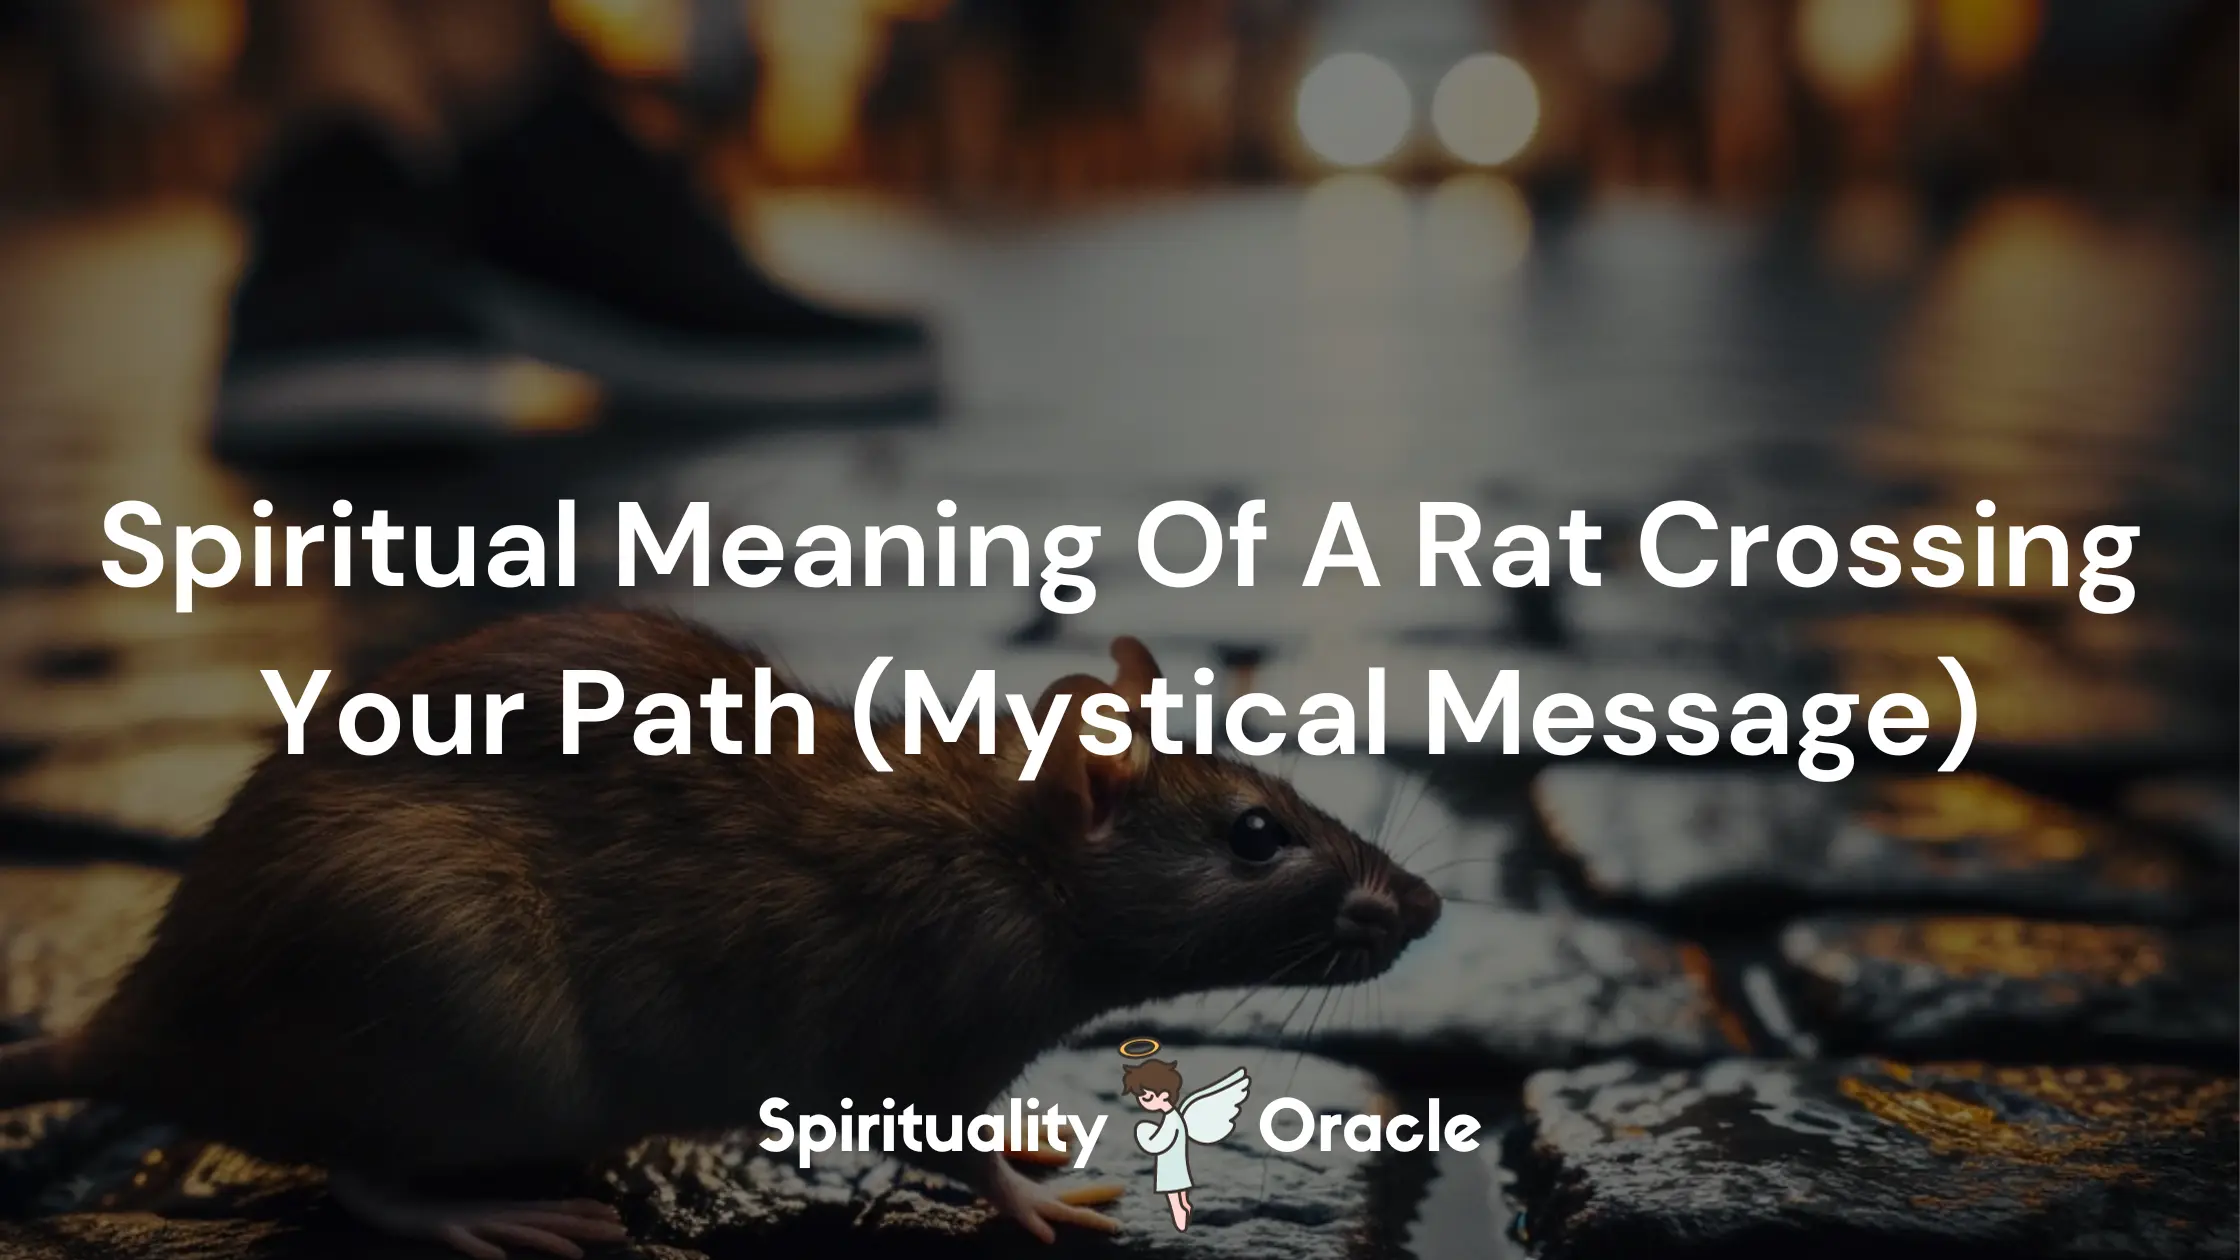 Spiritual Meaning Of A Rat Crossing Your Path (Mystical Message)